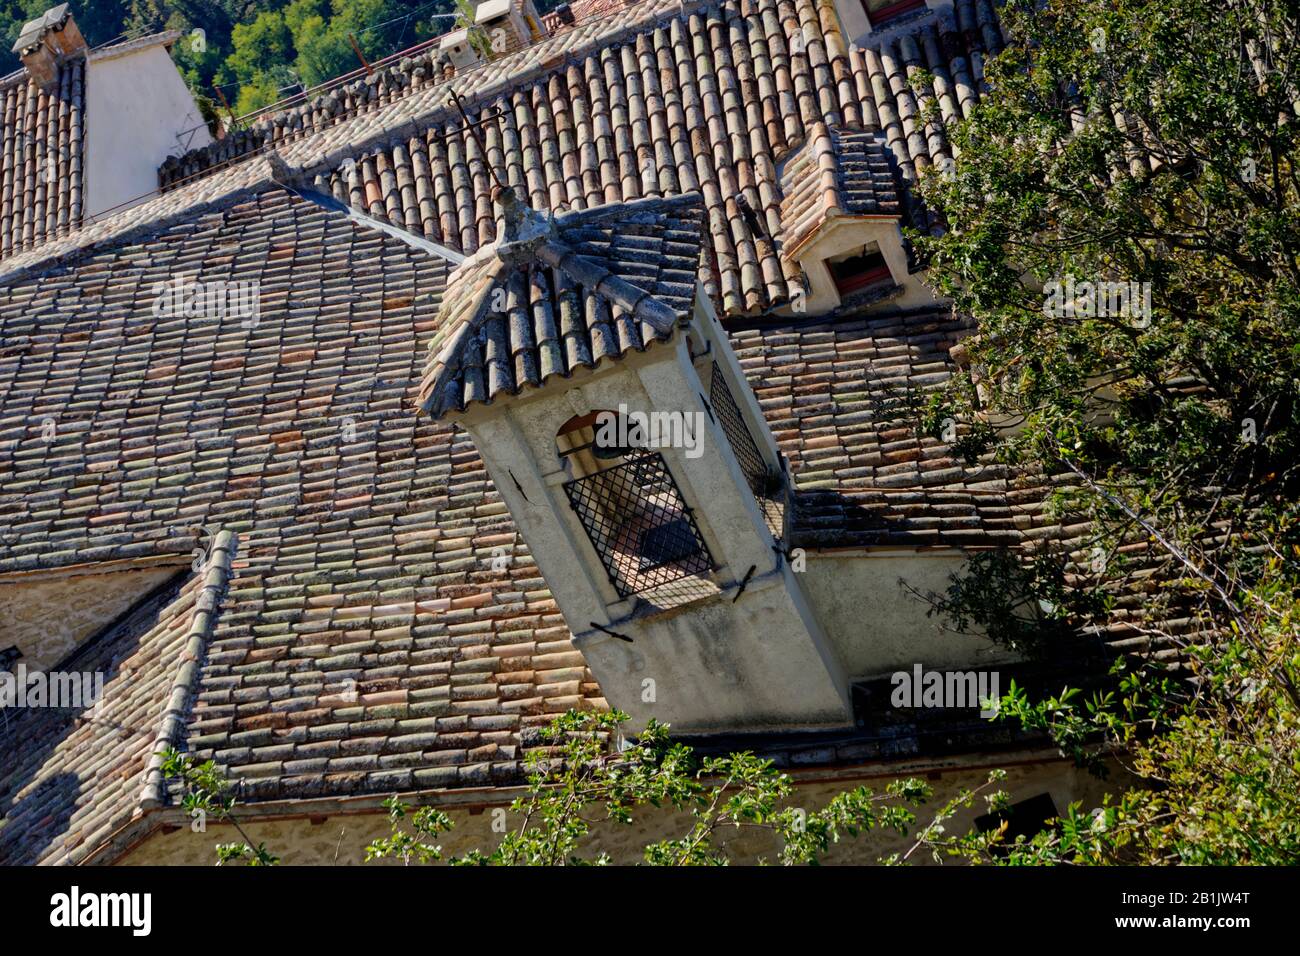 San Marino, San Marino - October 19, 2019: Tiled sloping roof with tiled bell tower. Stock Photo